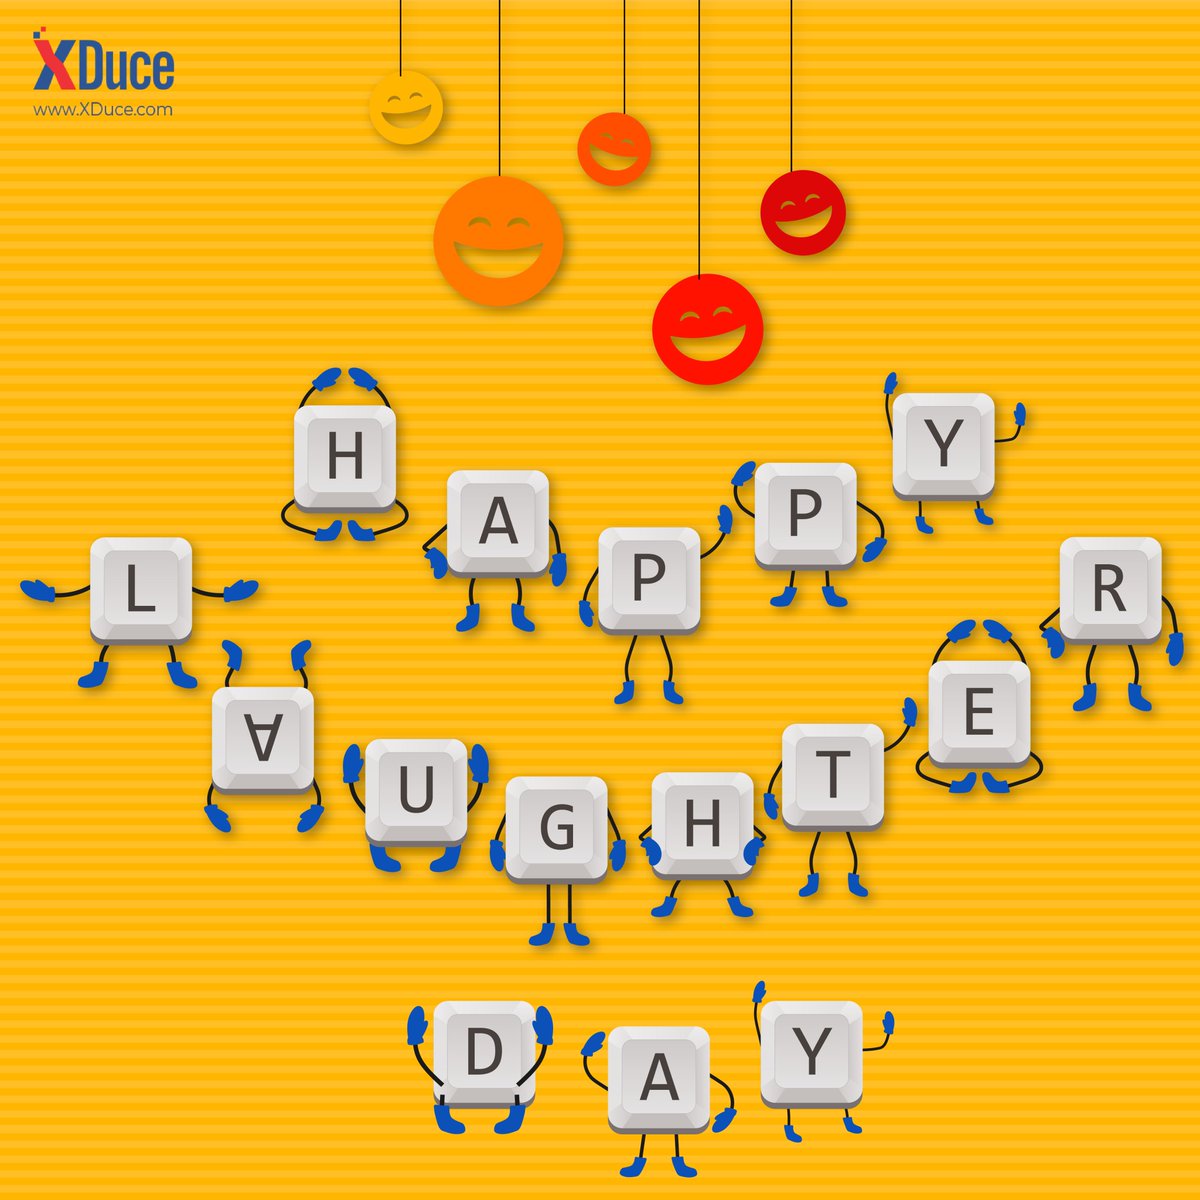 Let's LOL together! 
Happy World Laughter Day! 
Take a moment to enjoy a good laugh and appreciate the humor in life. After all, laughter is timeless, universal, and oh so contagious! 😂🎉 
#xduce #lol #WorldLaughterDay #laughtertherapy #celebratinghappiness #trendingnow